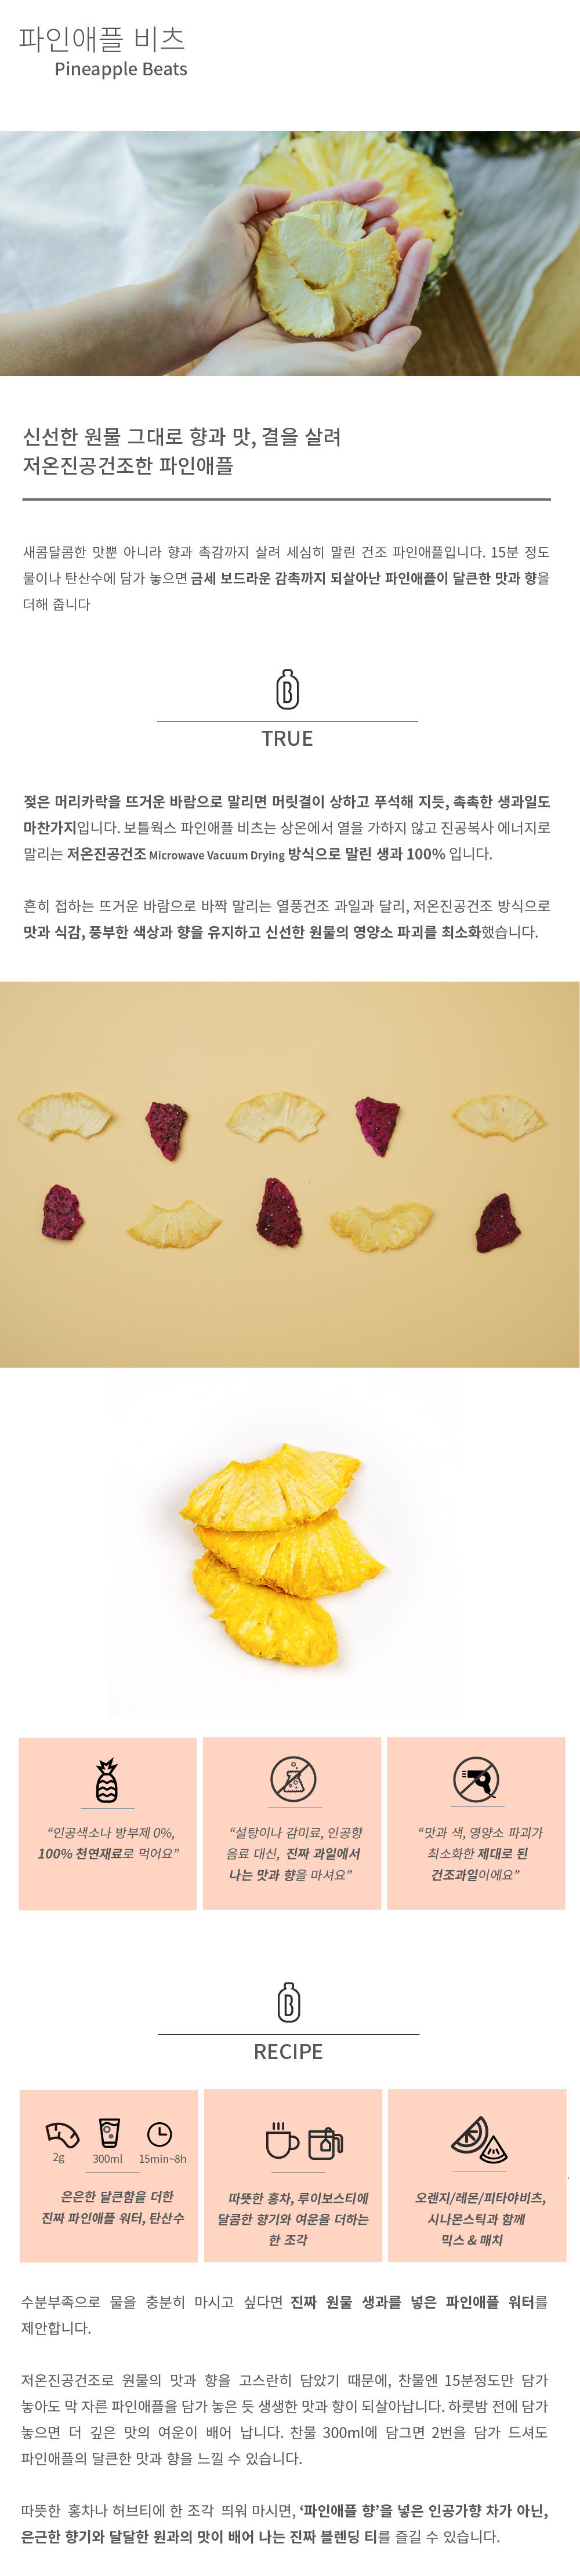 pineapple01_181521.png